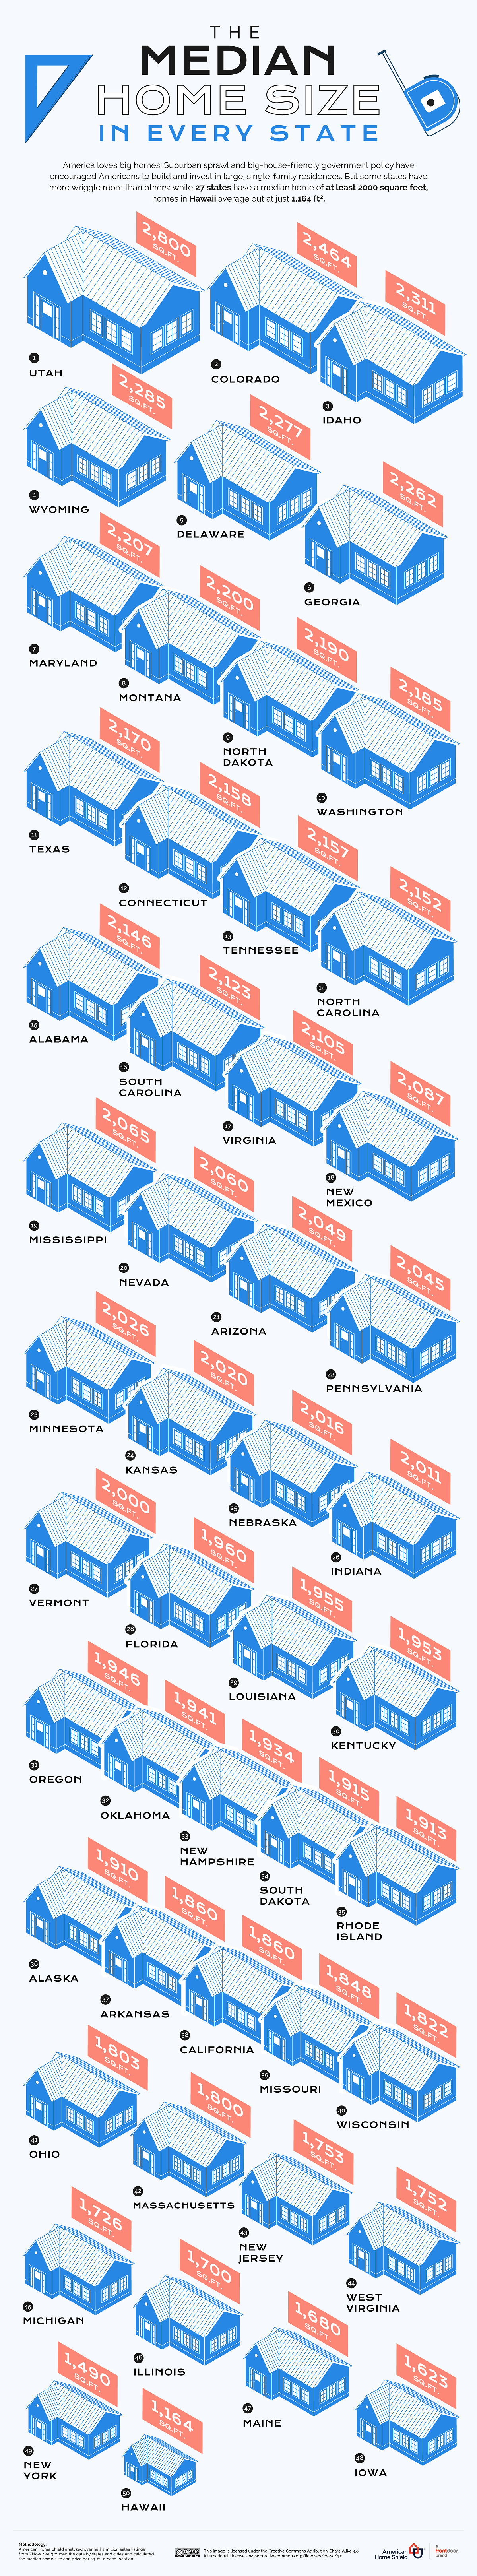 the average home size in every U.S. state